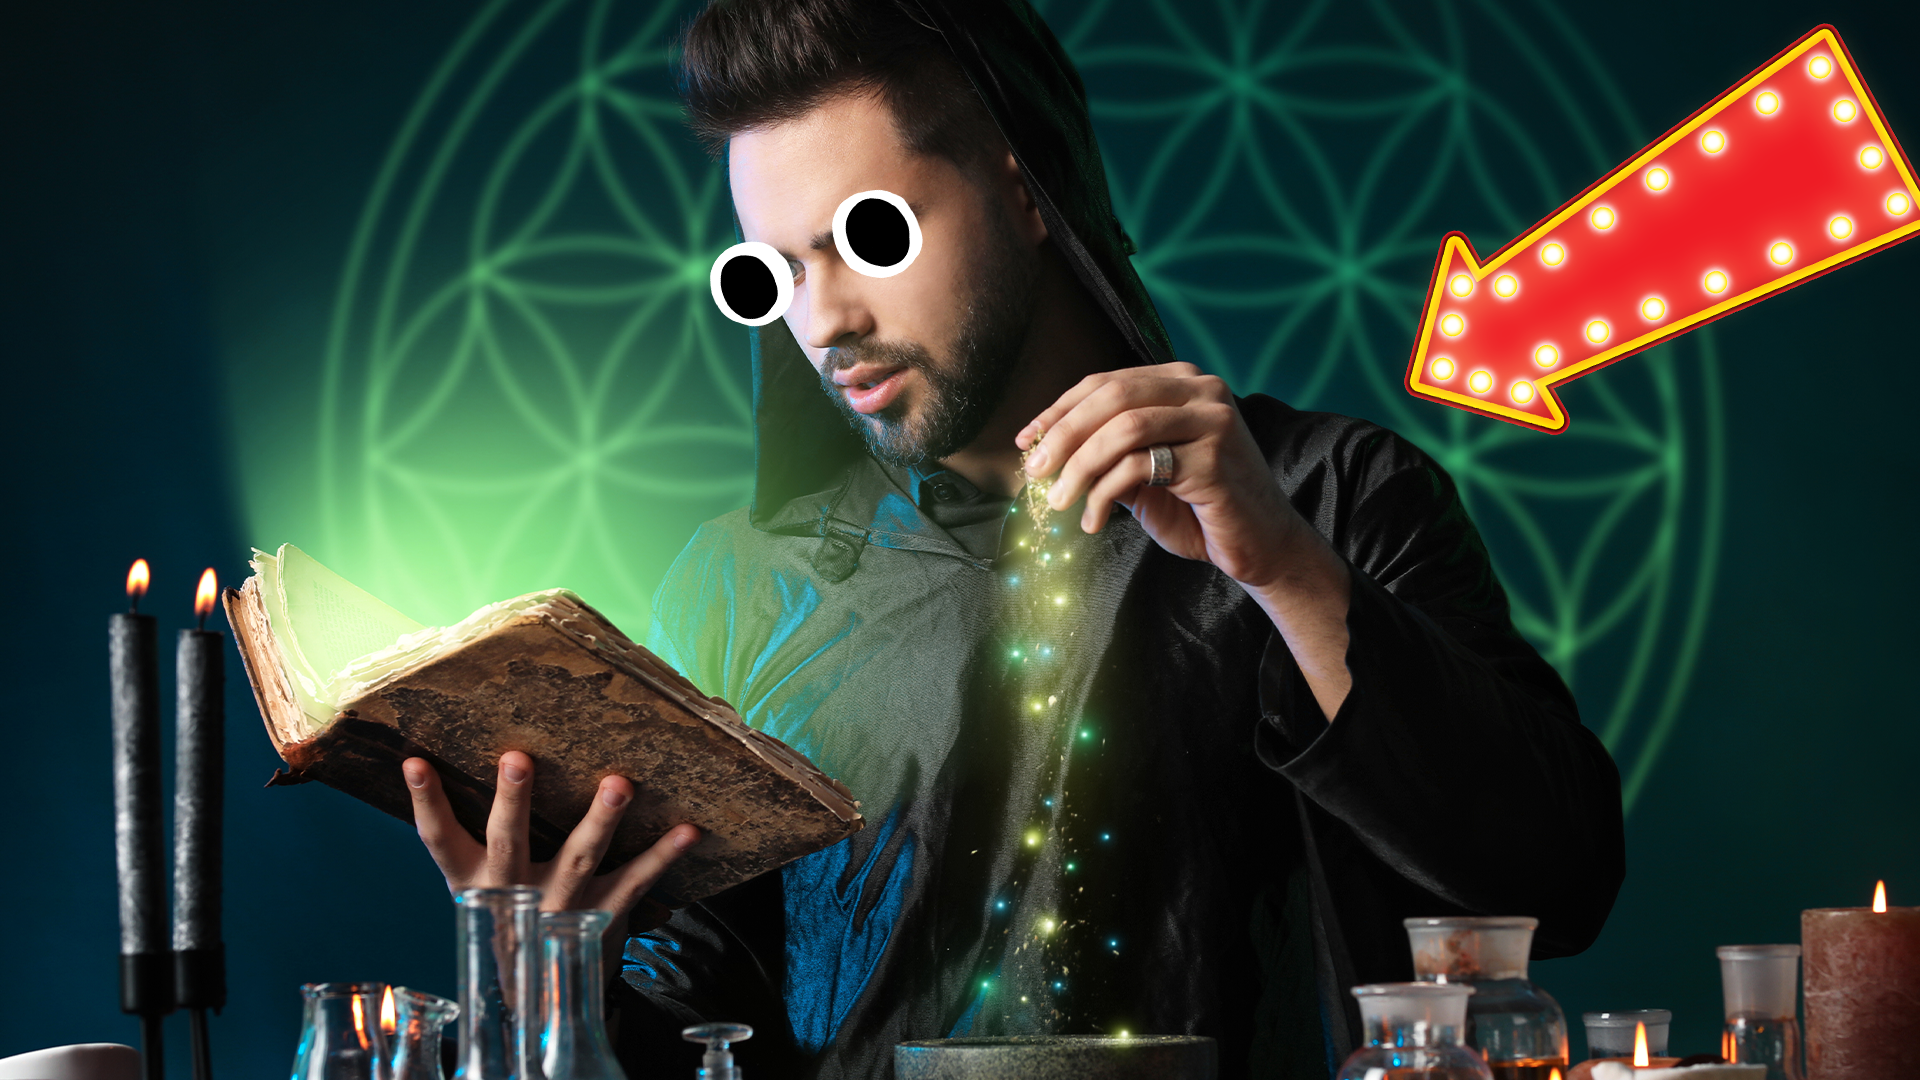 Warlock casting a spell with arrow pointing to him